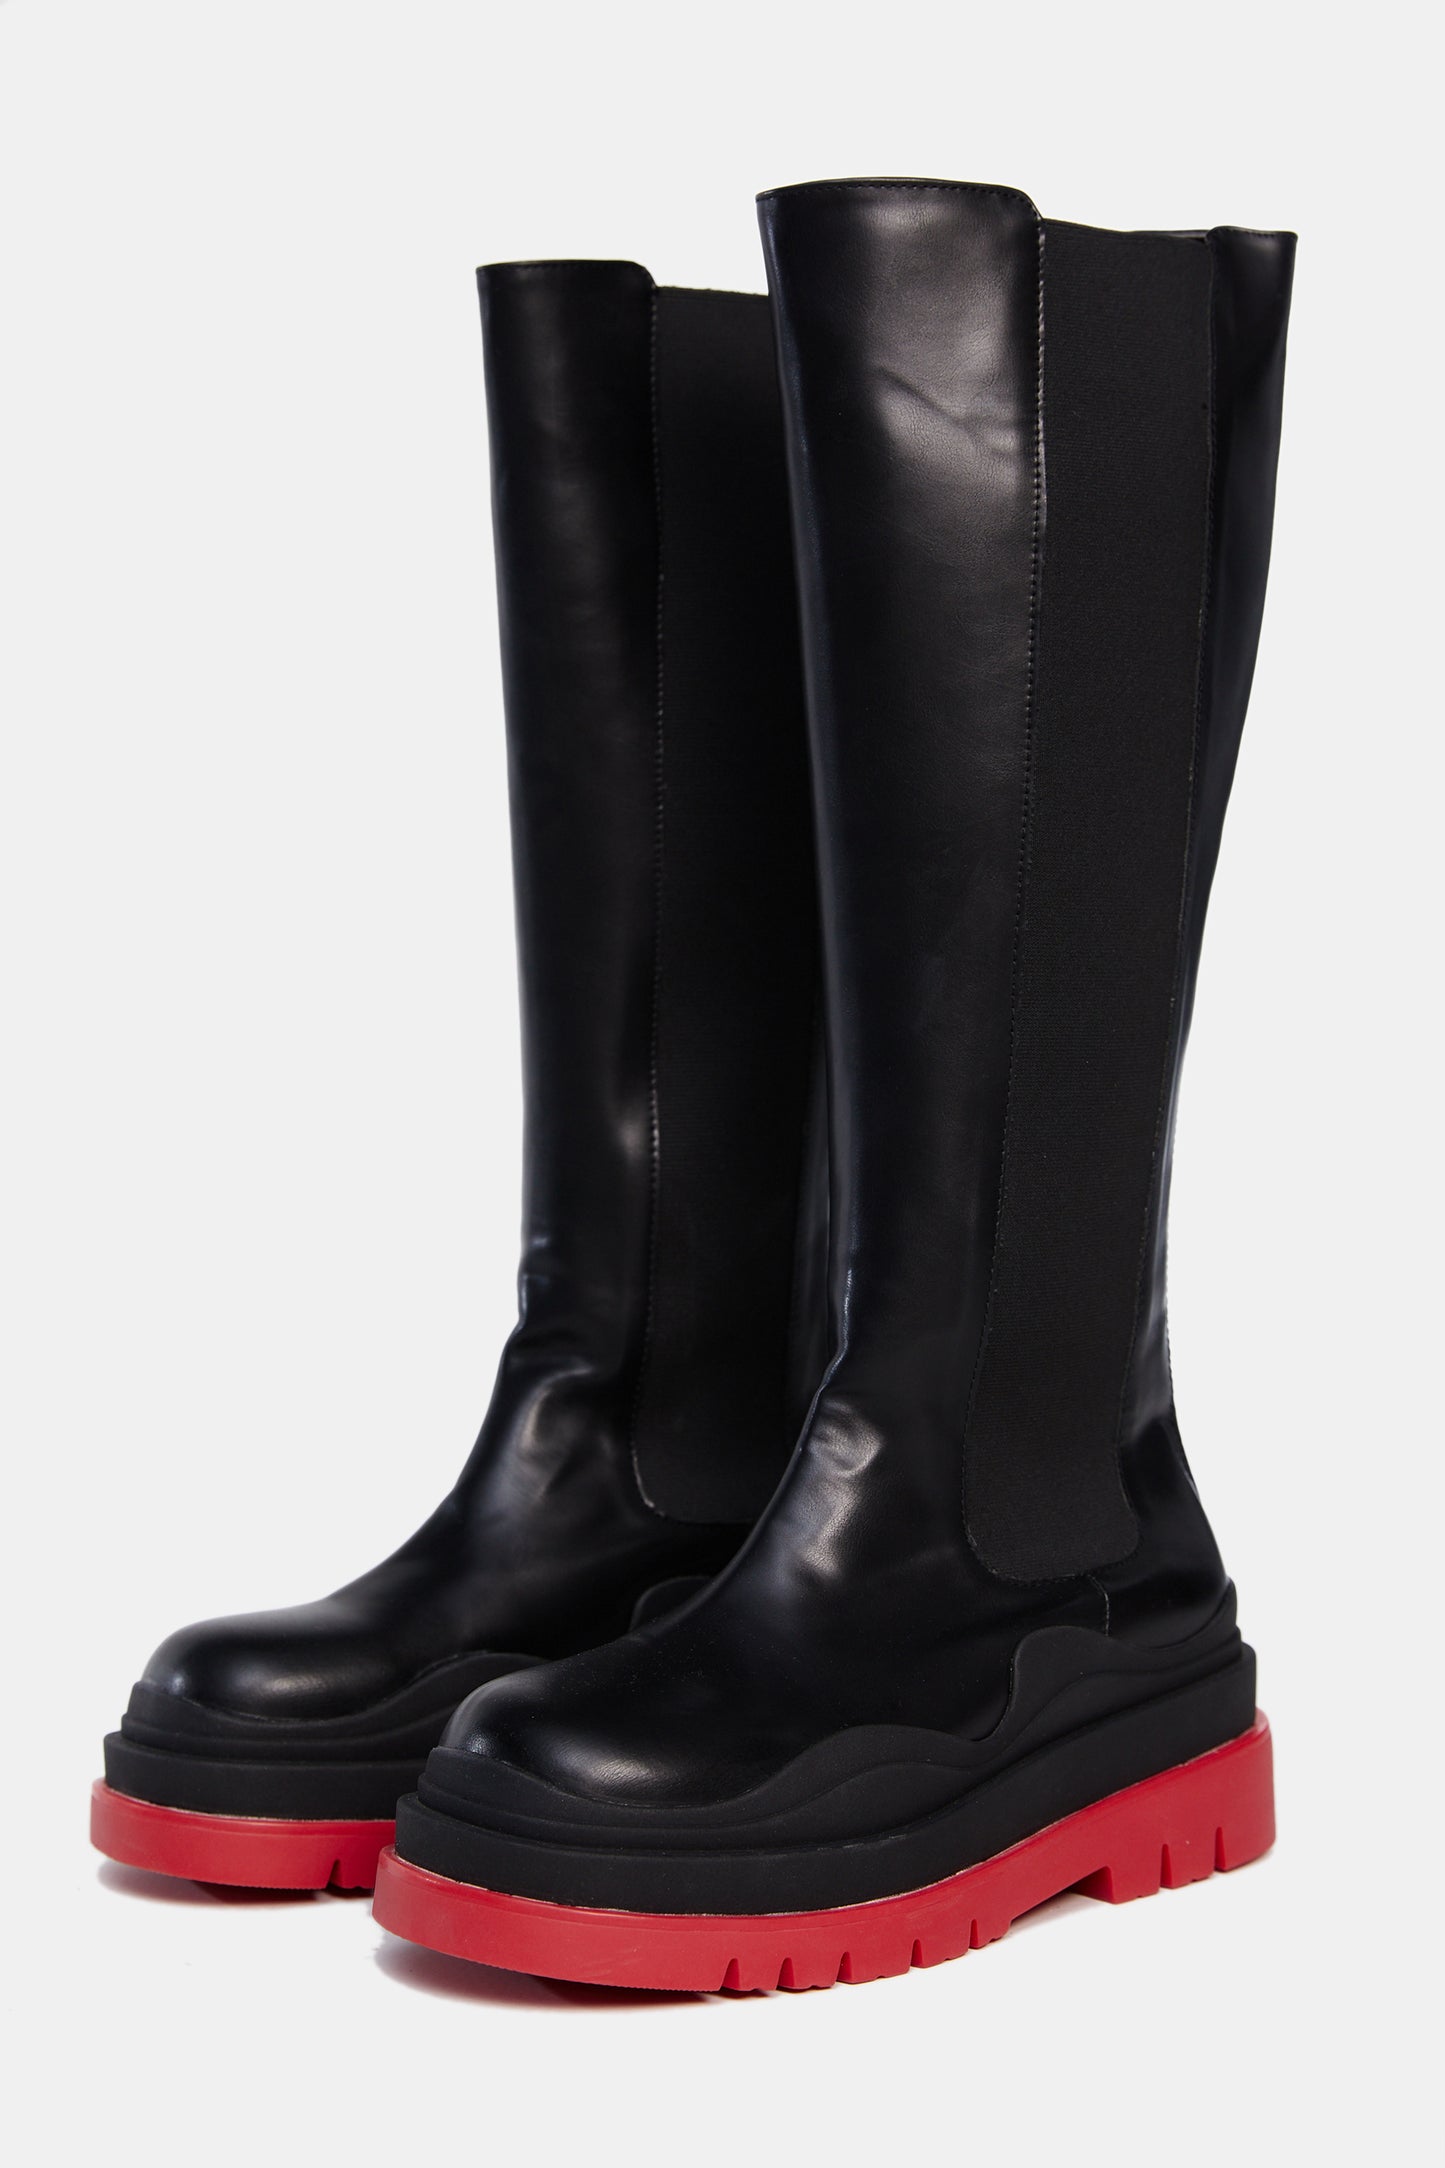 Lug Sole High Knee Boots, Red & Black